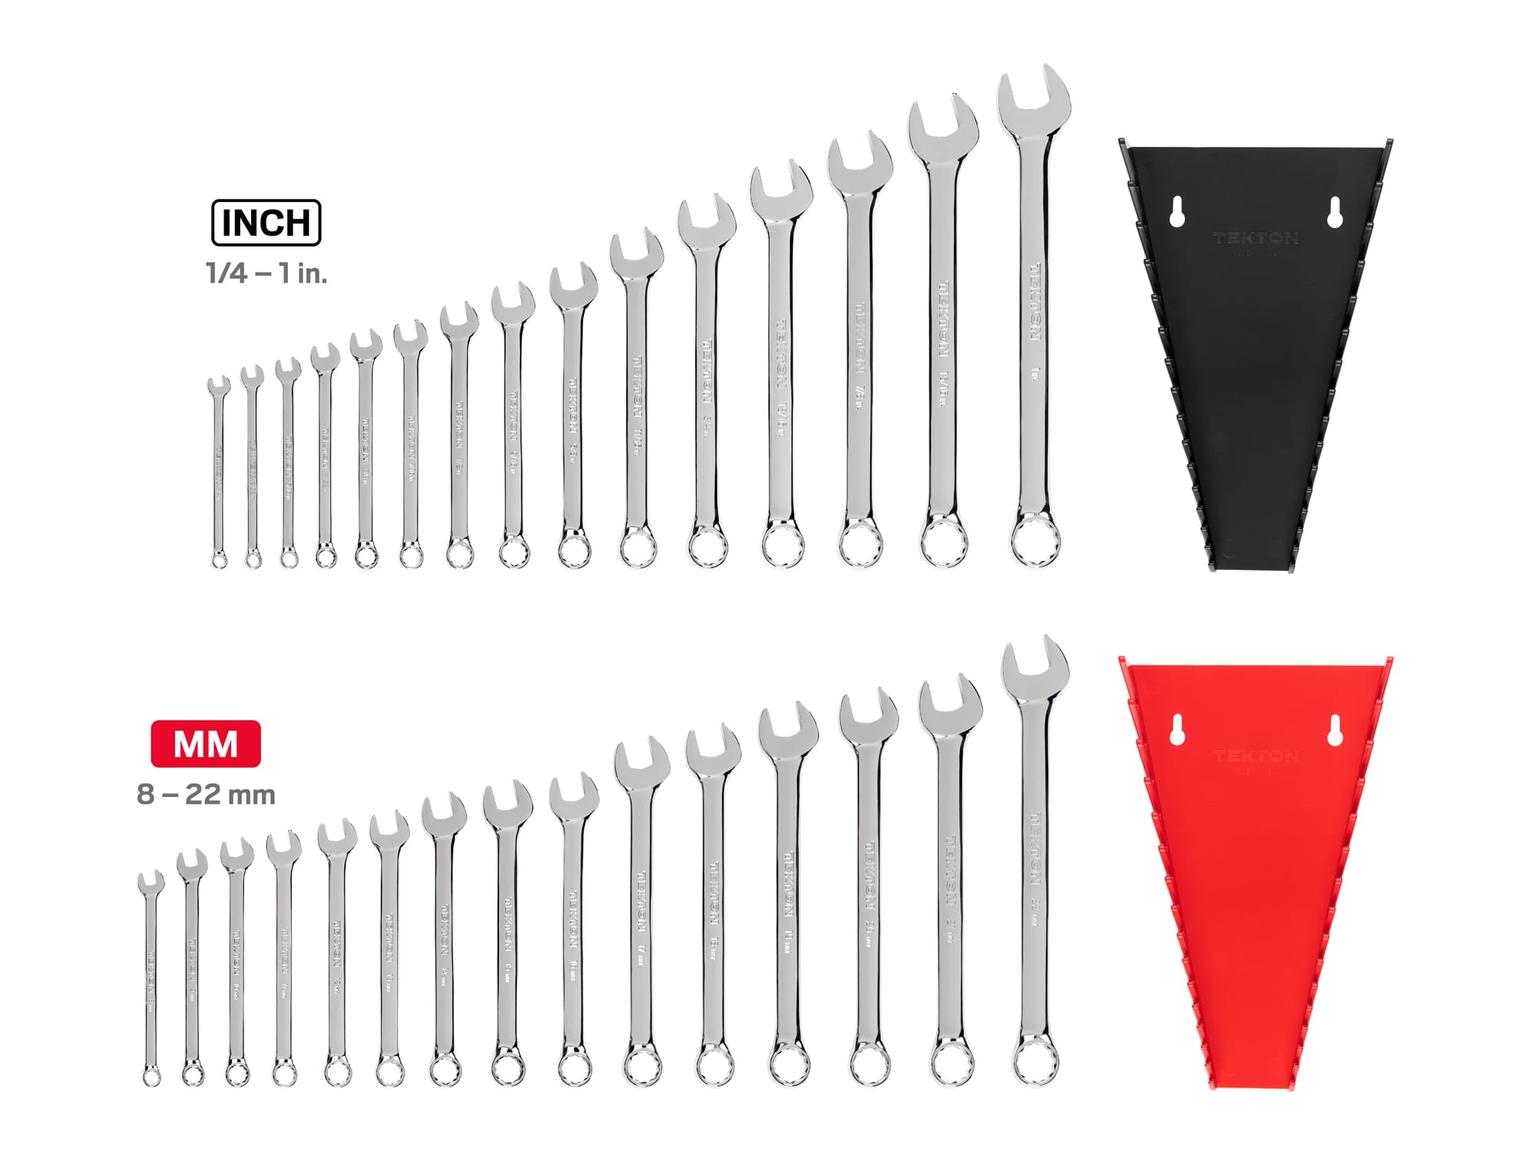 TEKTON WCB92303-T Combination Wrench Set with Rack, 30-Piece (1/4 - 1 in., 8 - 22 mm)